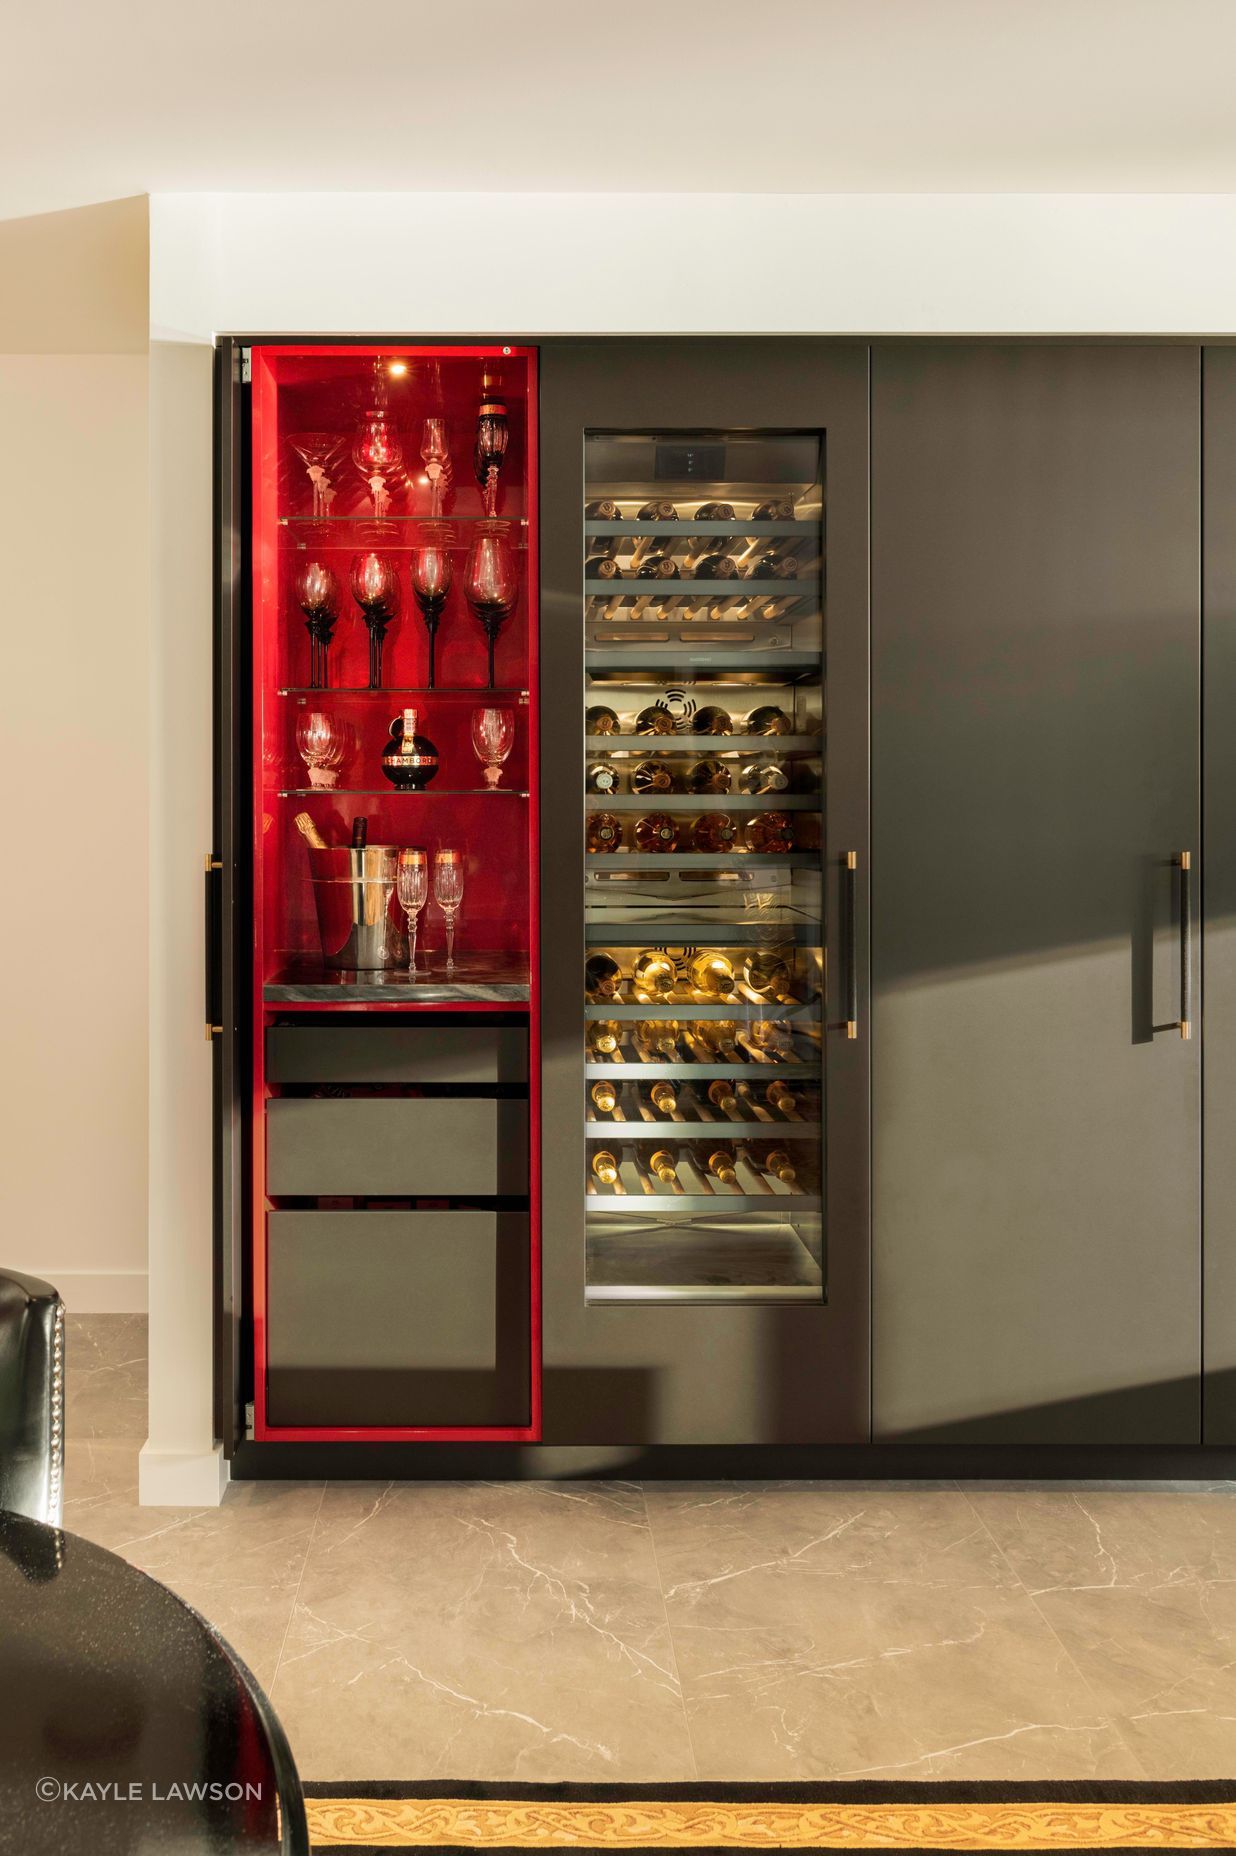 Beyond the integrated fridge, continues a freezer, wine chiller and hidden wine bar each embellished with black snake-skinned handles with polished brass-tip detailing; a nod to gold-leafed furniture collections.  Amongst this tall charcoal block, the displayed backlit wine collection is a welcome golden glowing interruption.